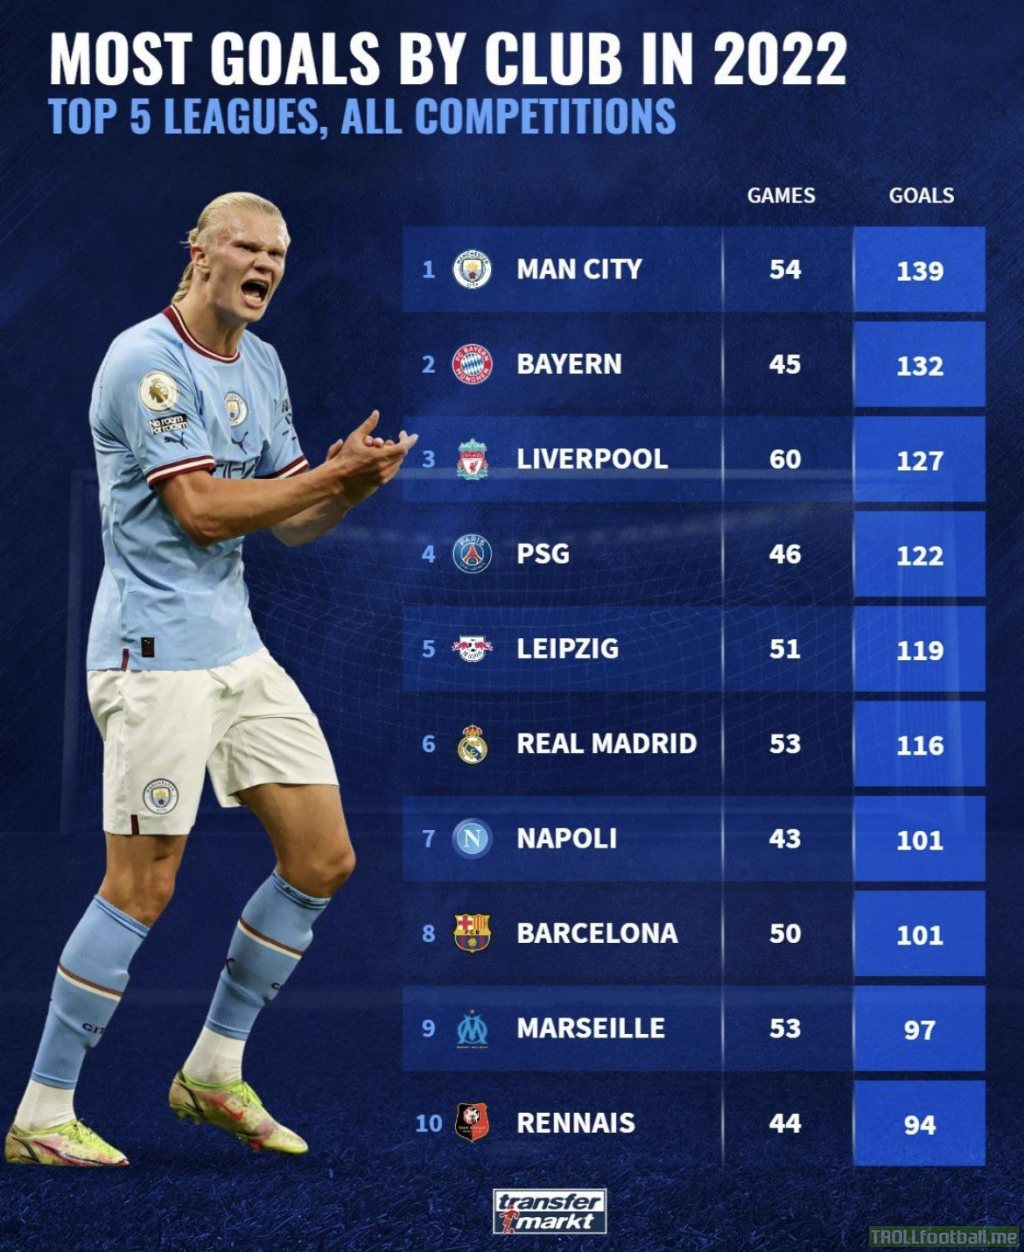 Most goals by Clubs in 2022